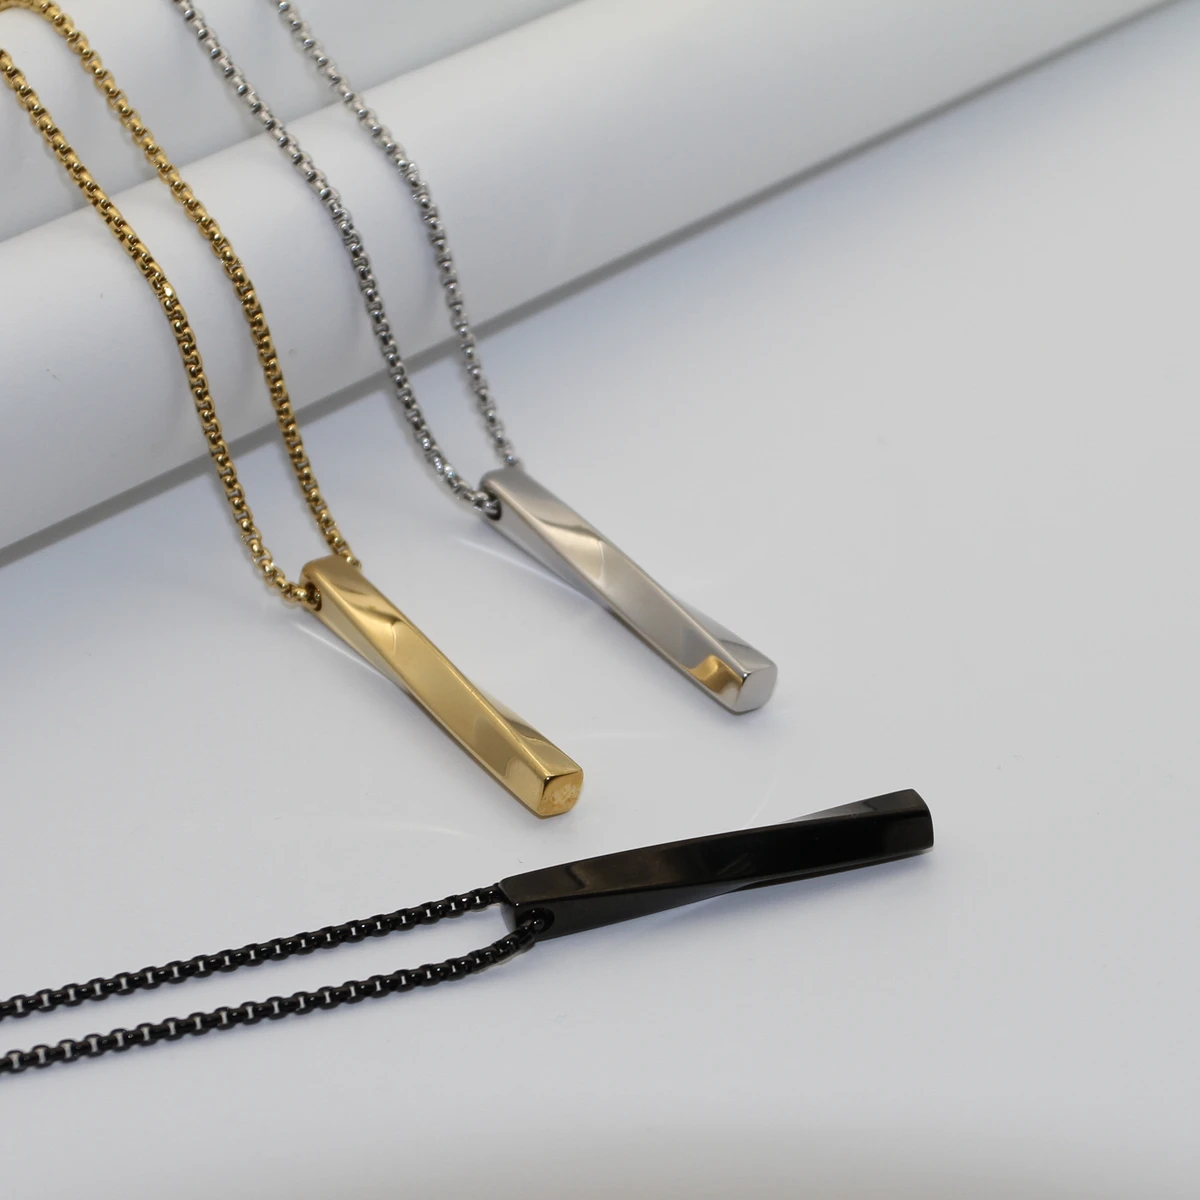 Style Accessories Men's Accessories Rectangle Necklaces Fashion Jewelry